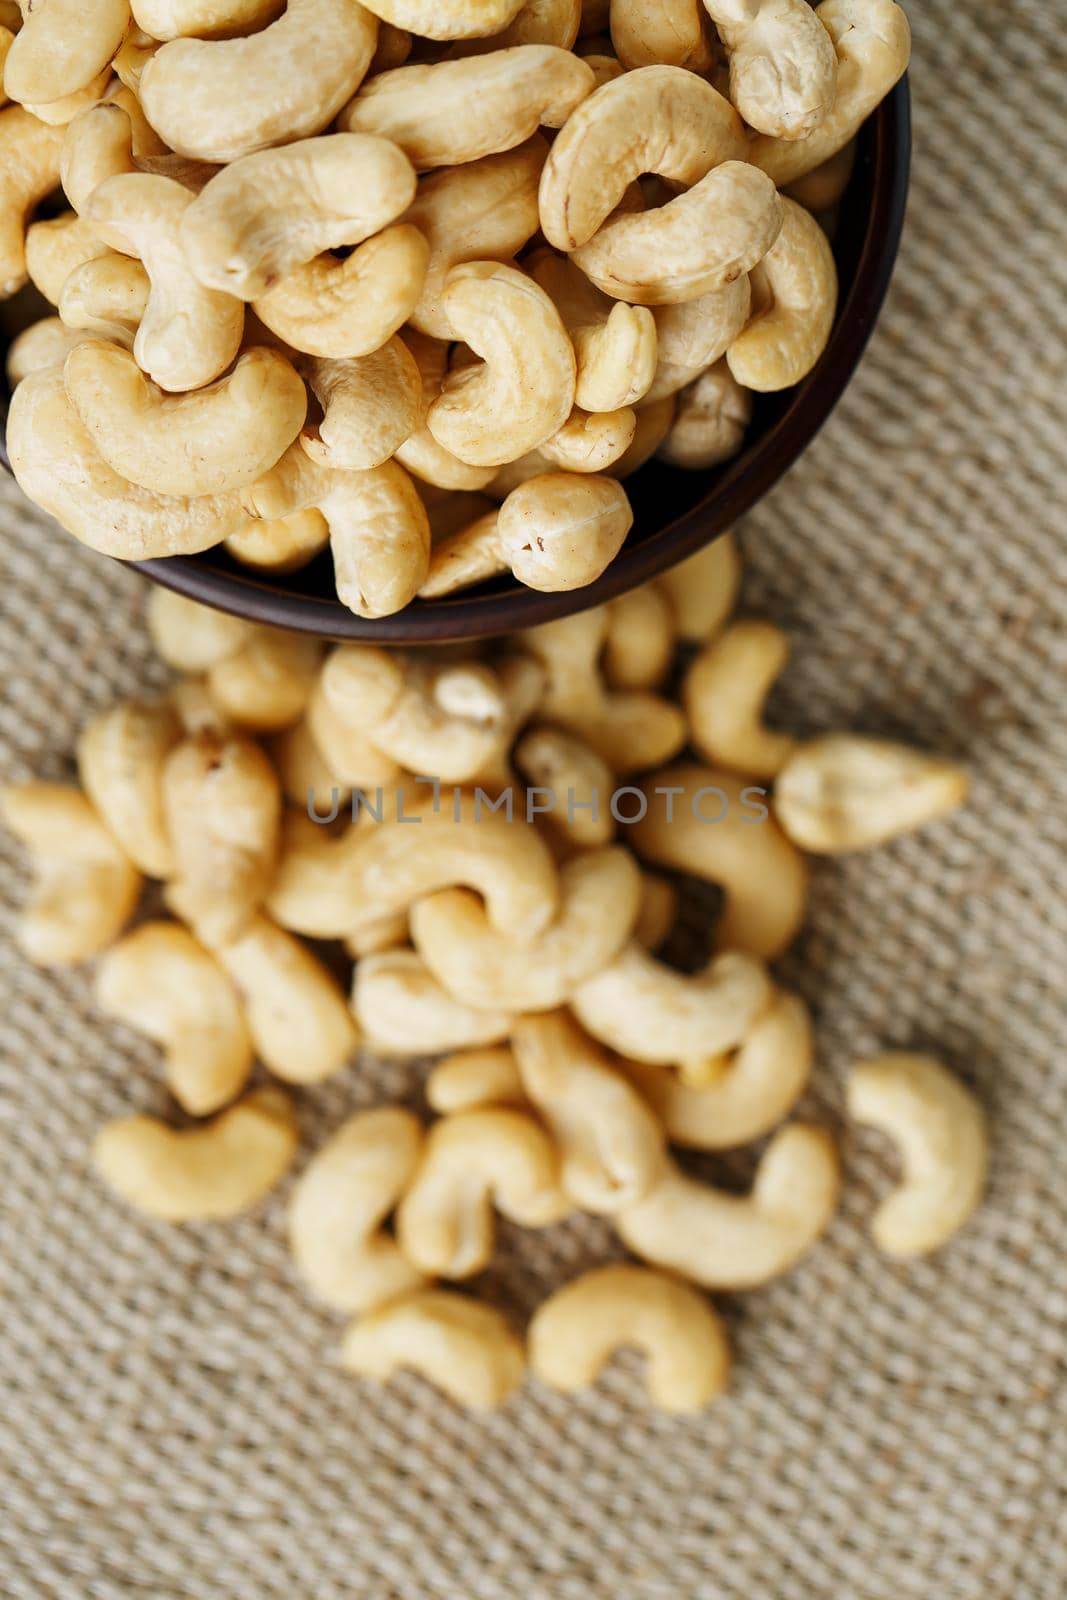 Cashew nuts in a wooden bowl on a burlap cloth background. Golden cashew close-up in a dark brown cup.